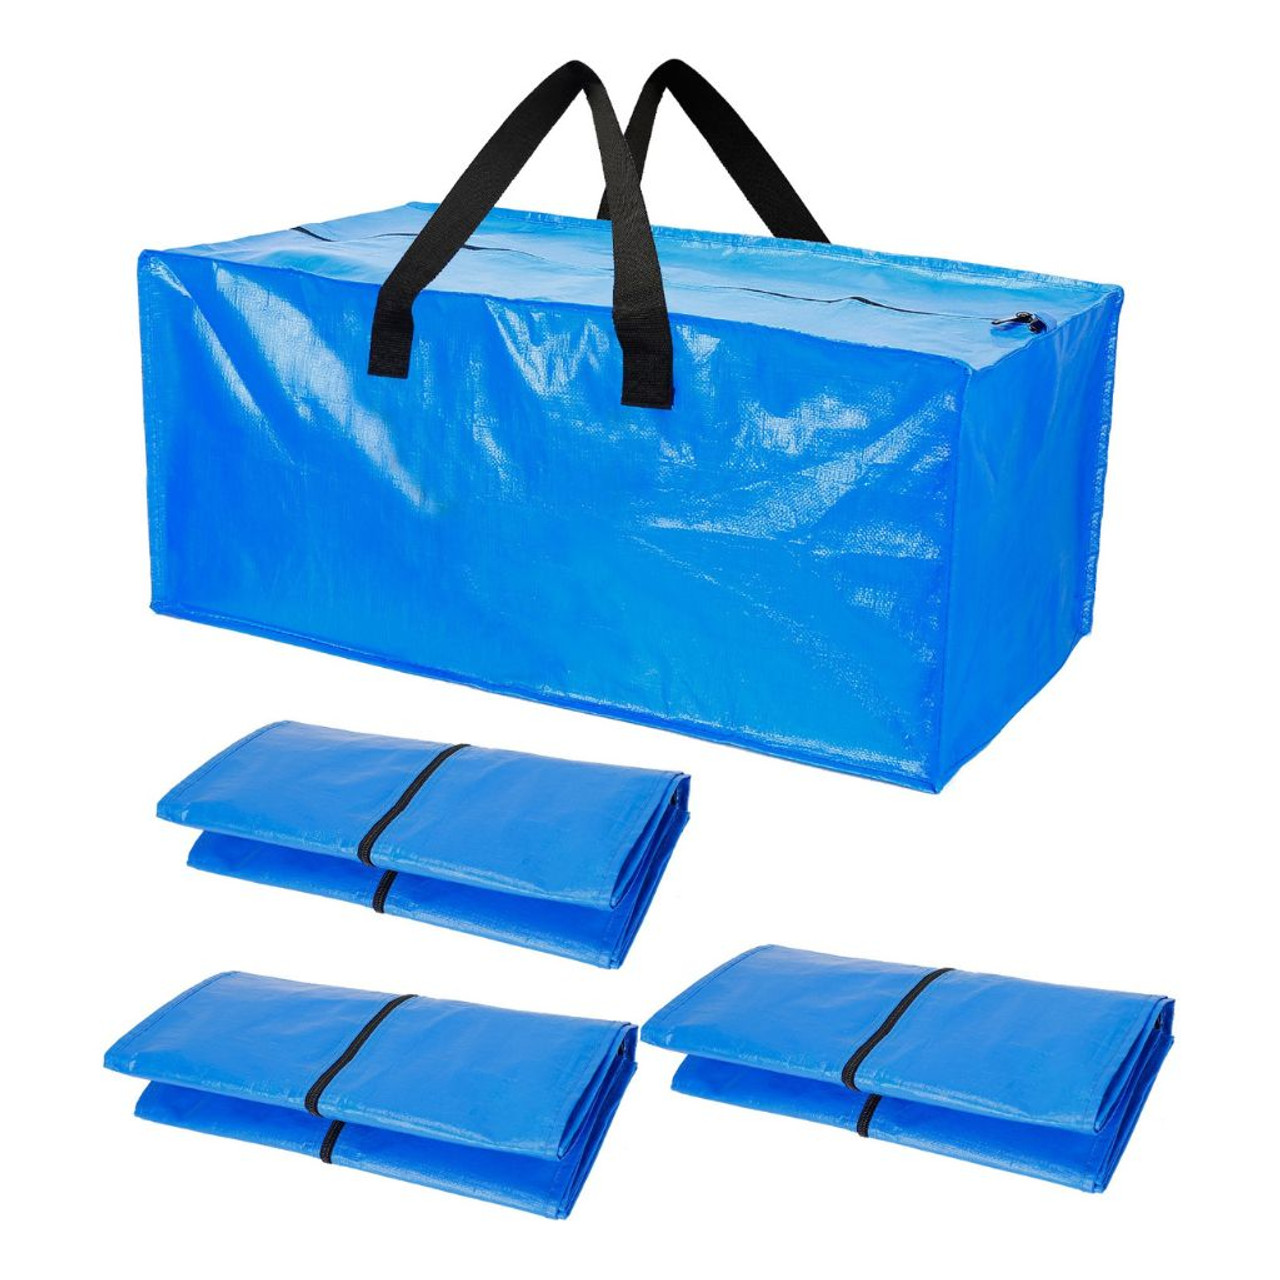 Heavy-Duty Storage Tote Bag (4-Pack) product image